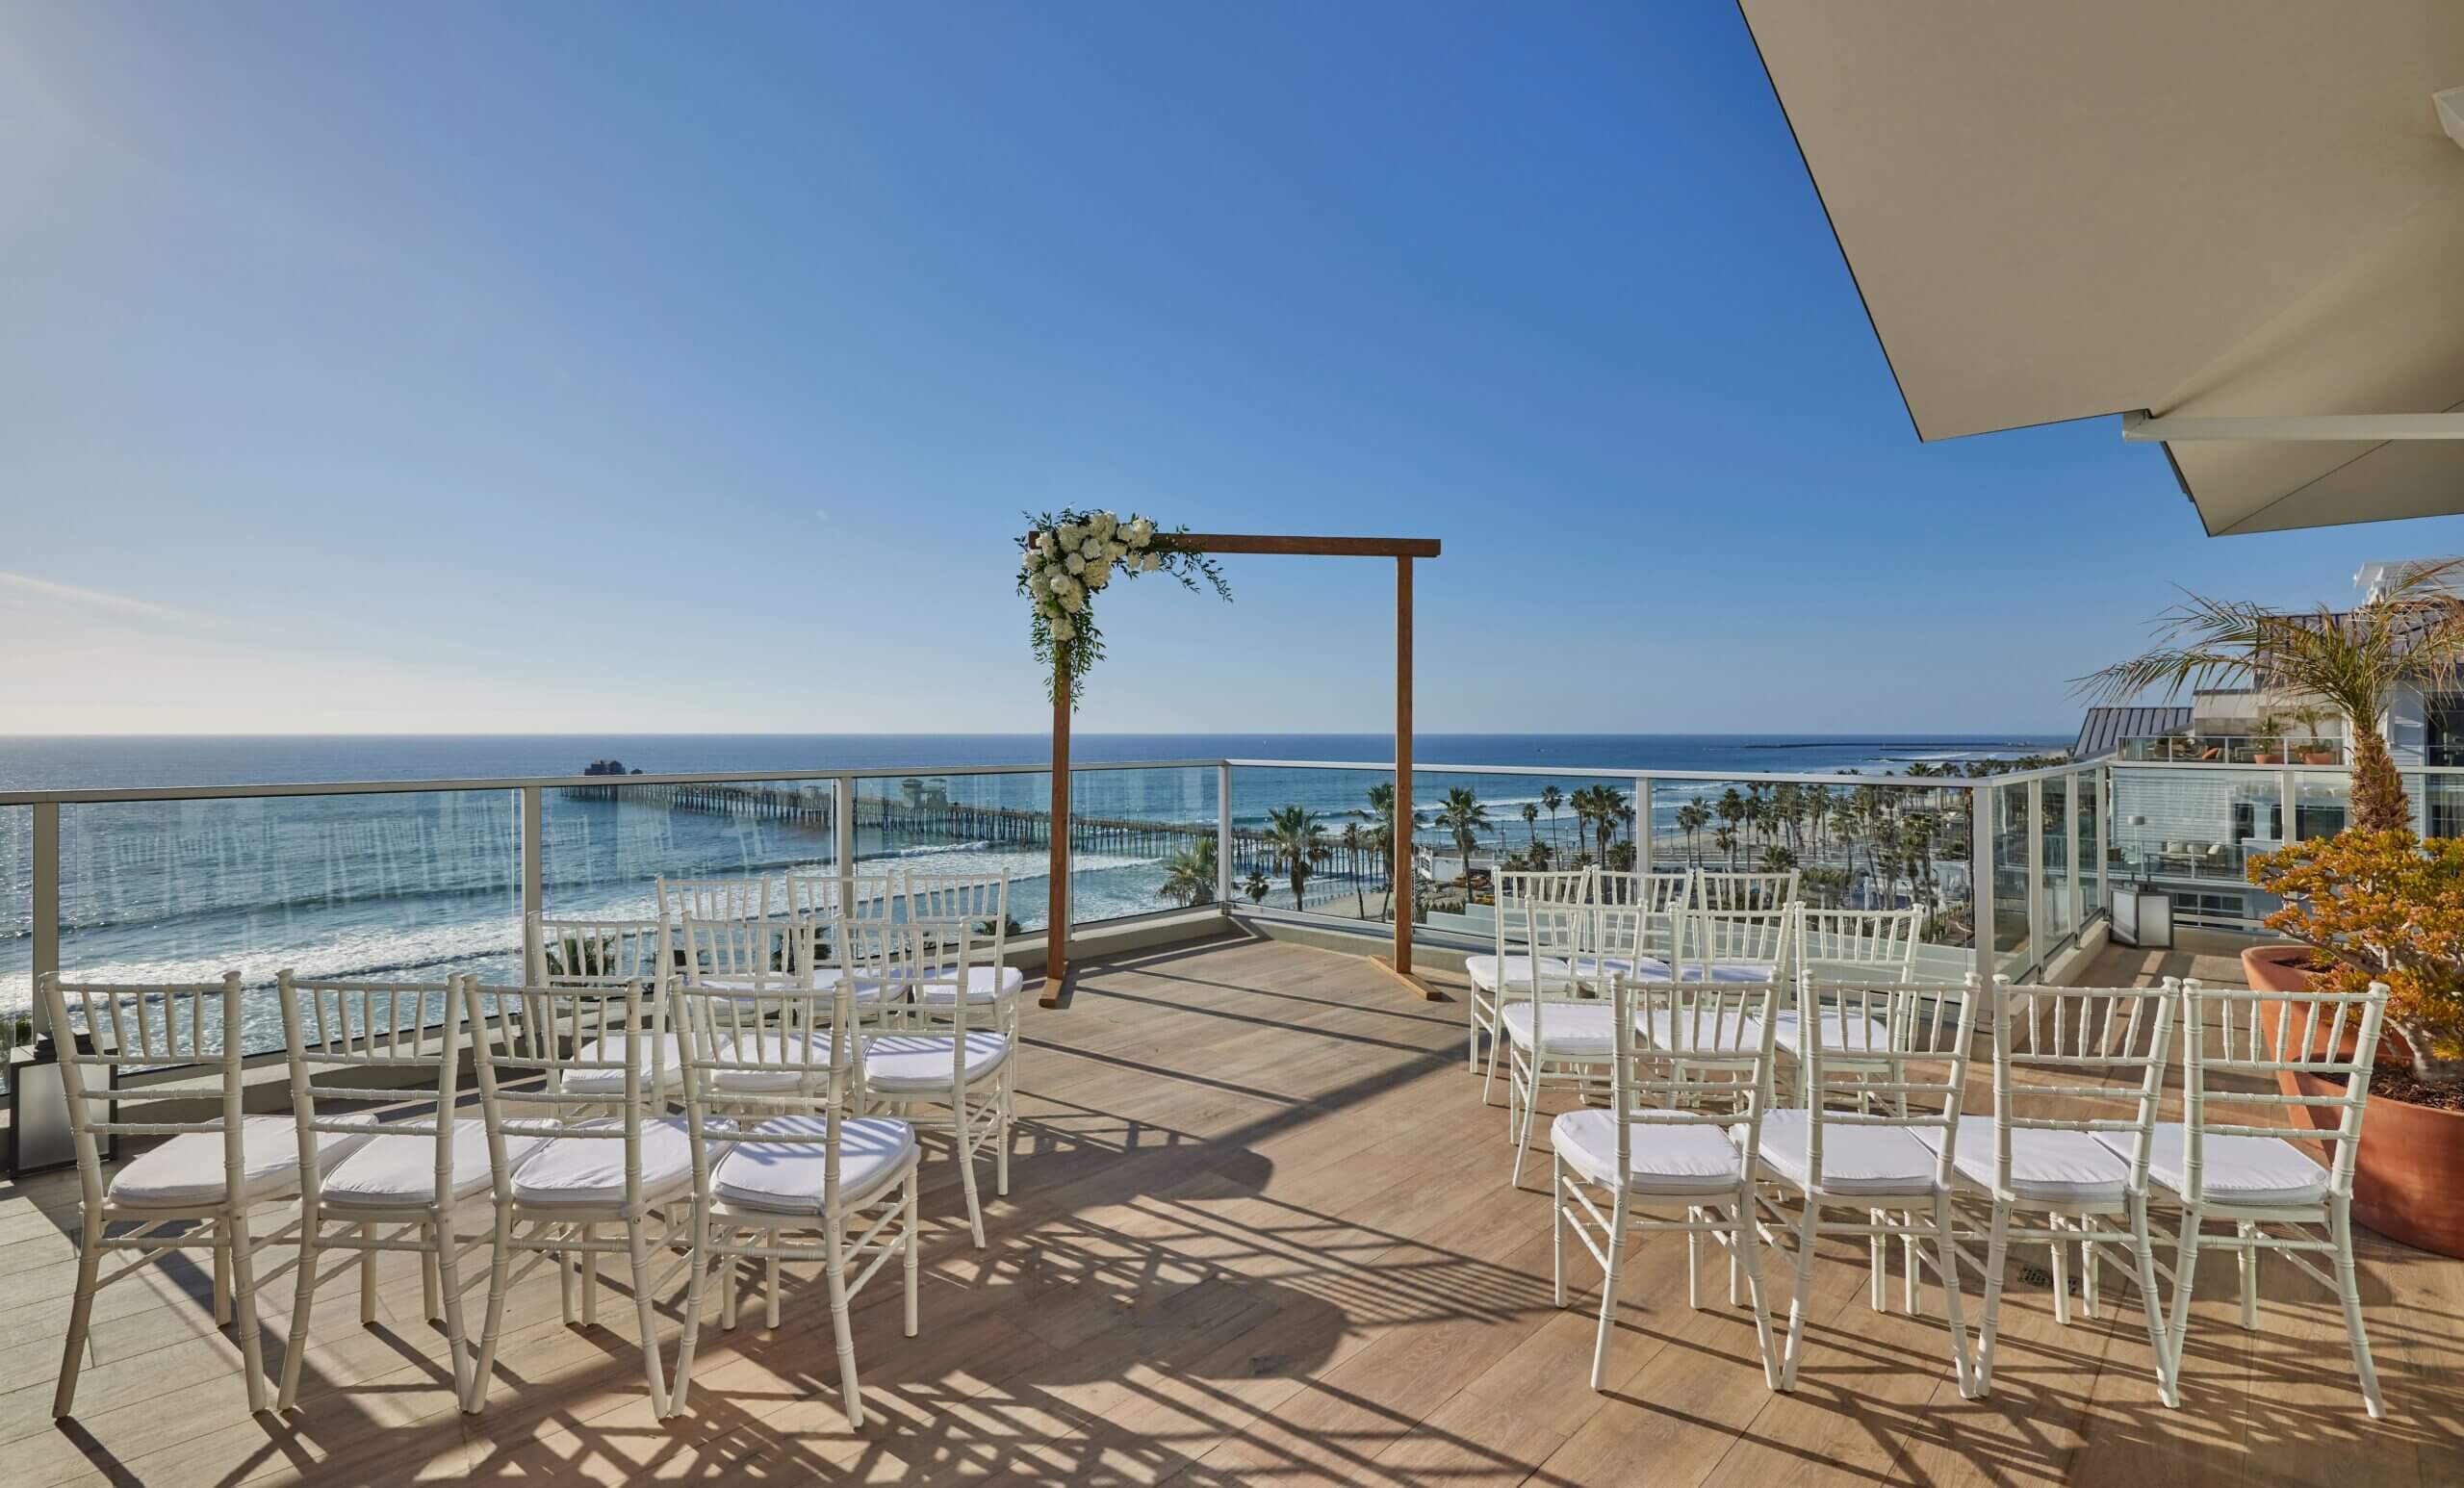 Beautiful setting for a wedding in the beach